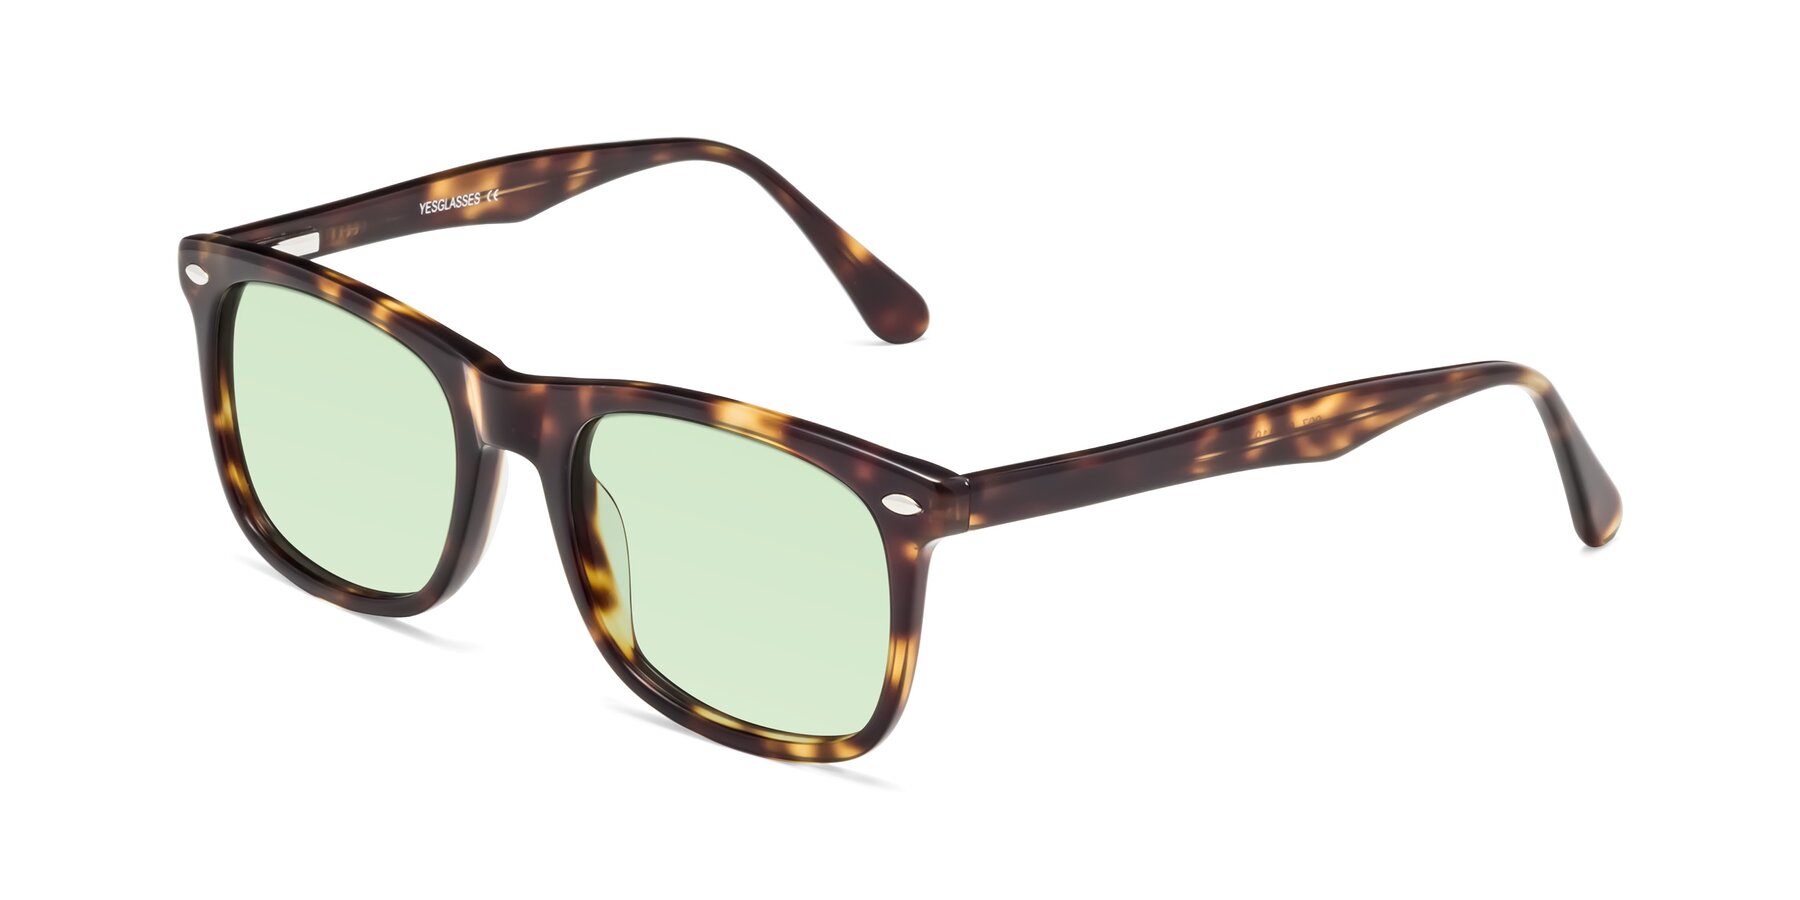 Angle of 007 in Yellow Tortoise with Light Green Tinted Lenses